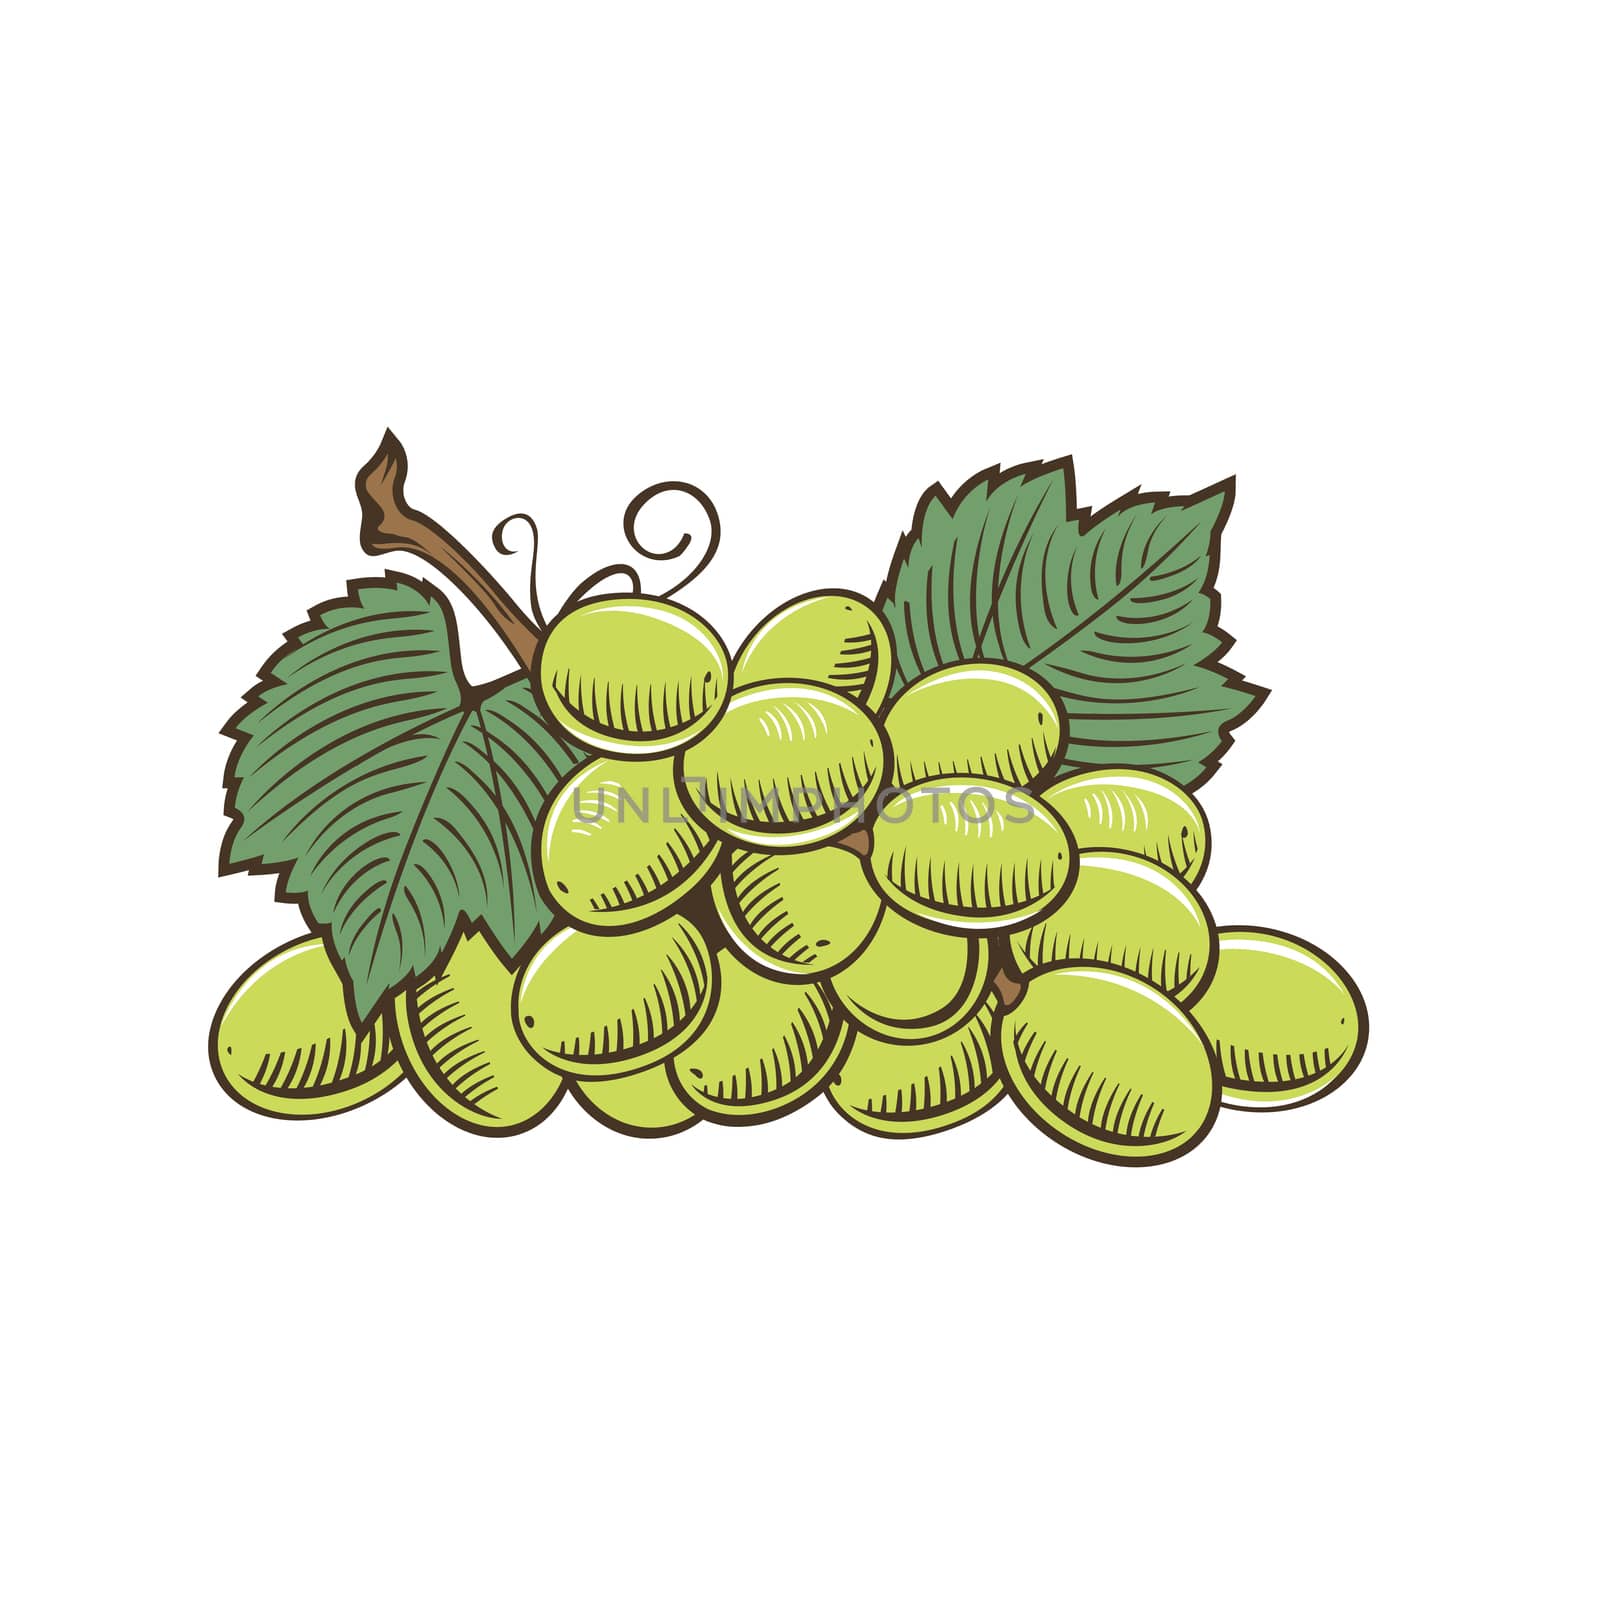 Grapes in vintage style by ConceptCafe